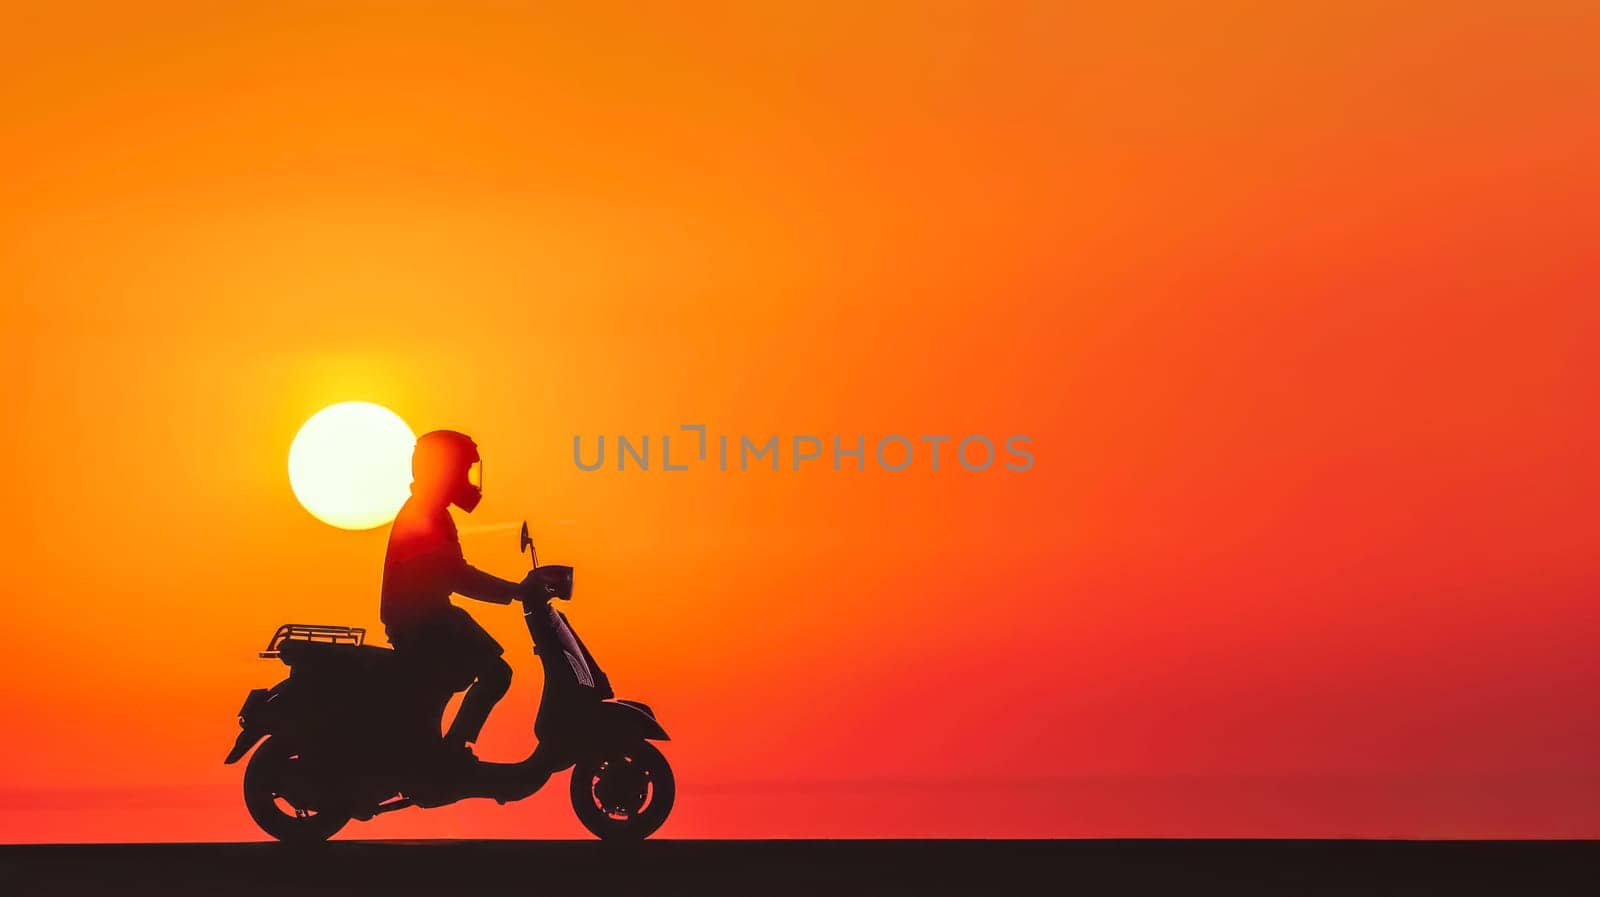 Unidentified person enjoying a peaceful sunset scooter ride silhouette with vibrant orange background and tranquil summer evening adventure